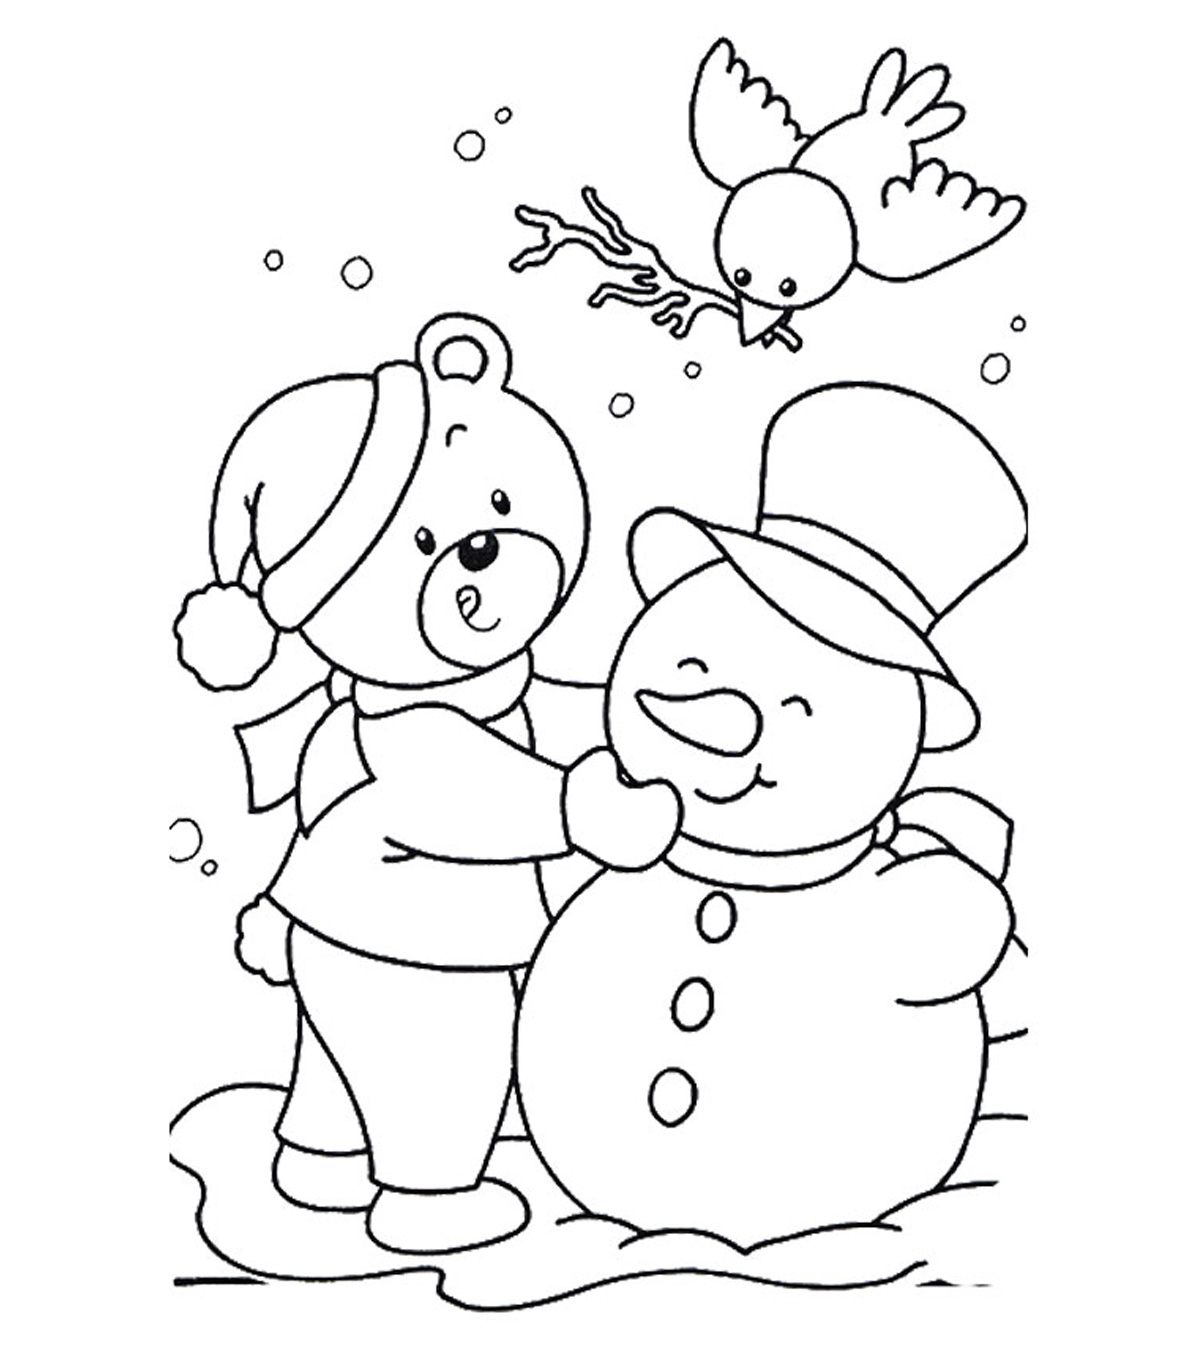 January Coloring Pages Your Toddler Will Love To Color_image